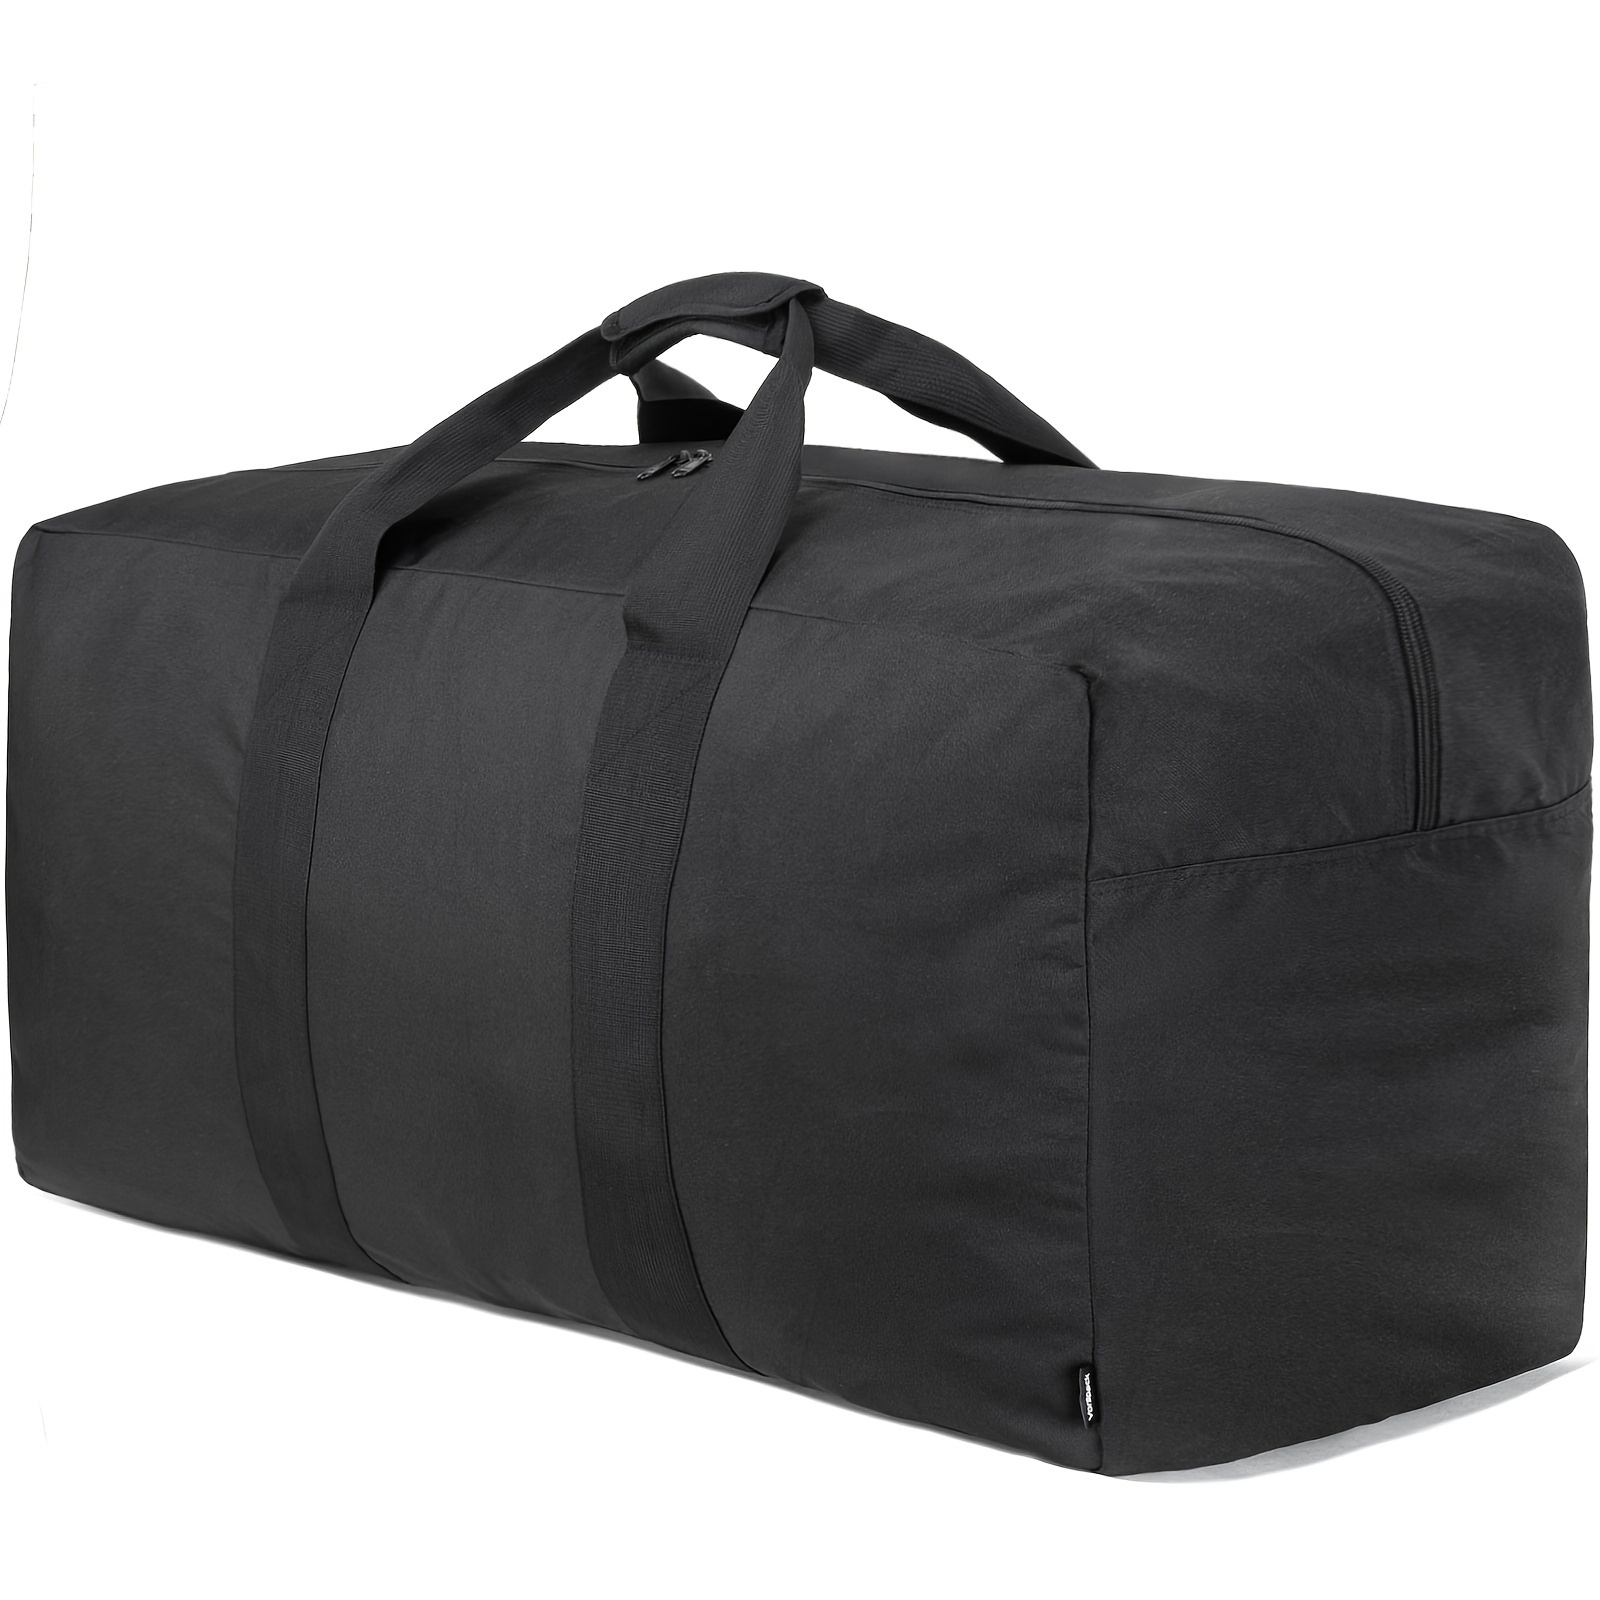 

Extra Large Duffle Bag For Travel - 150l Duffel Bag For Men Gear Bag For Storage Foldable Weekender Bag For Overnight Camping - Black